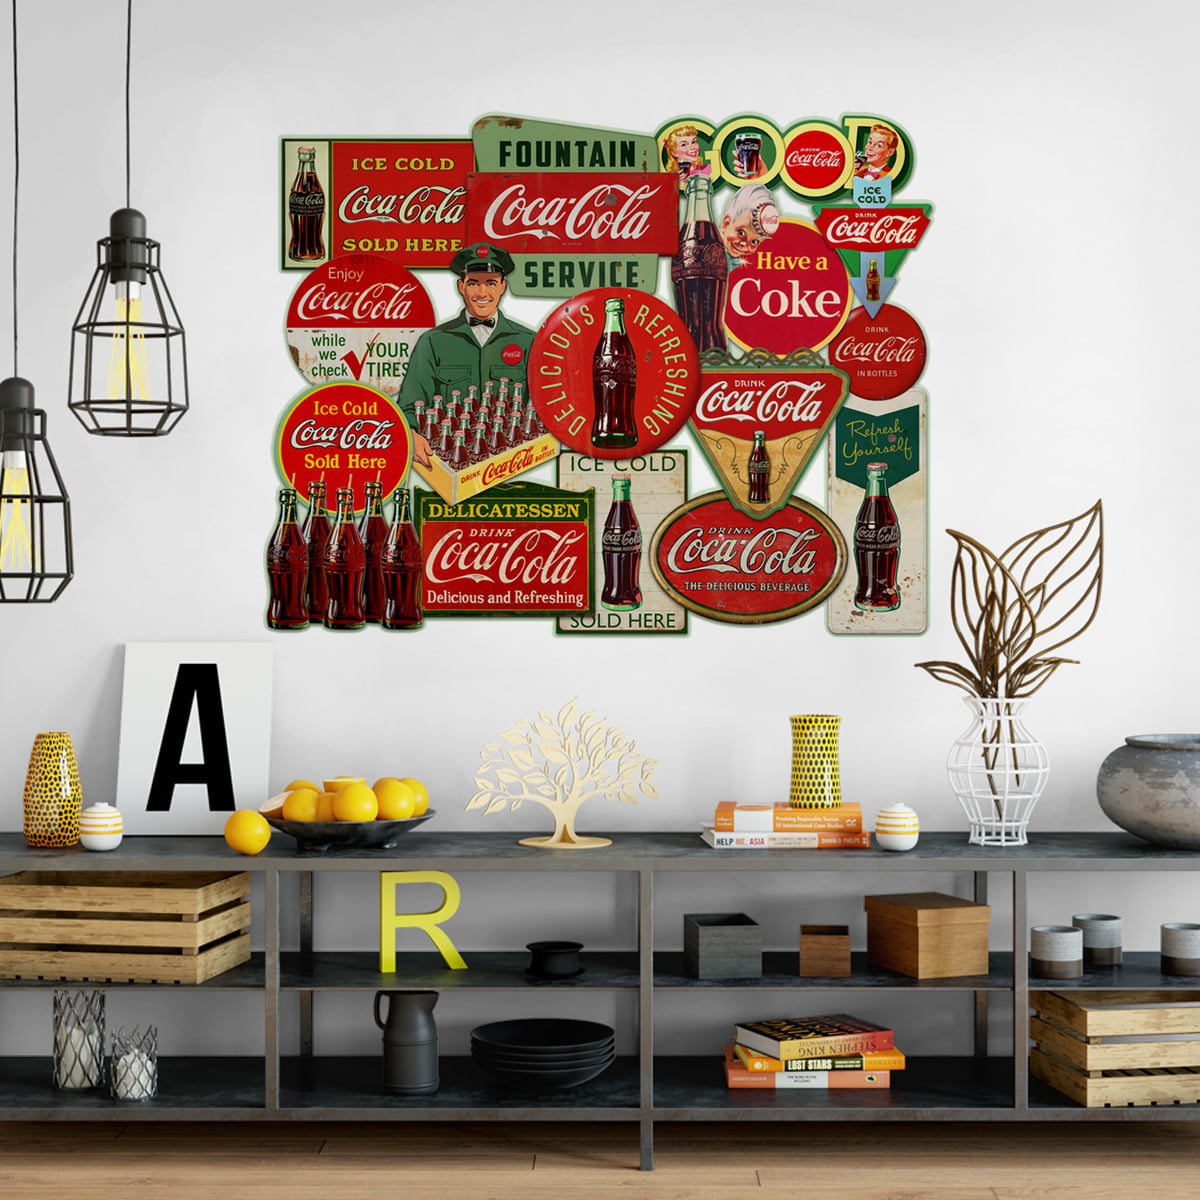 Coca-Cola Fountain Service Antique Style Collage Large Wall Decal Mural 48 x  60 